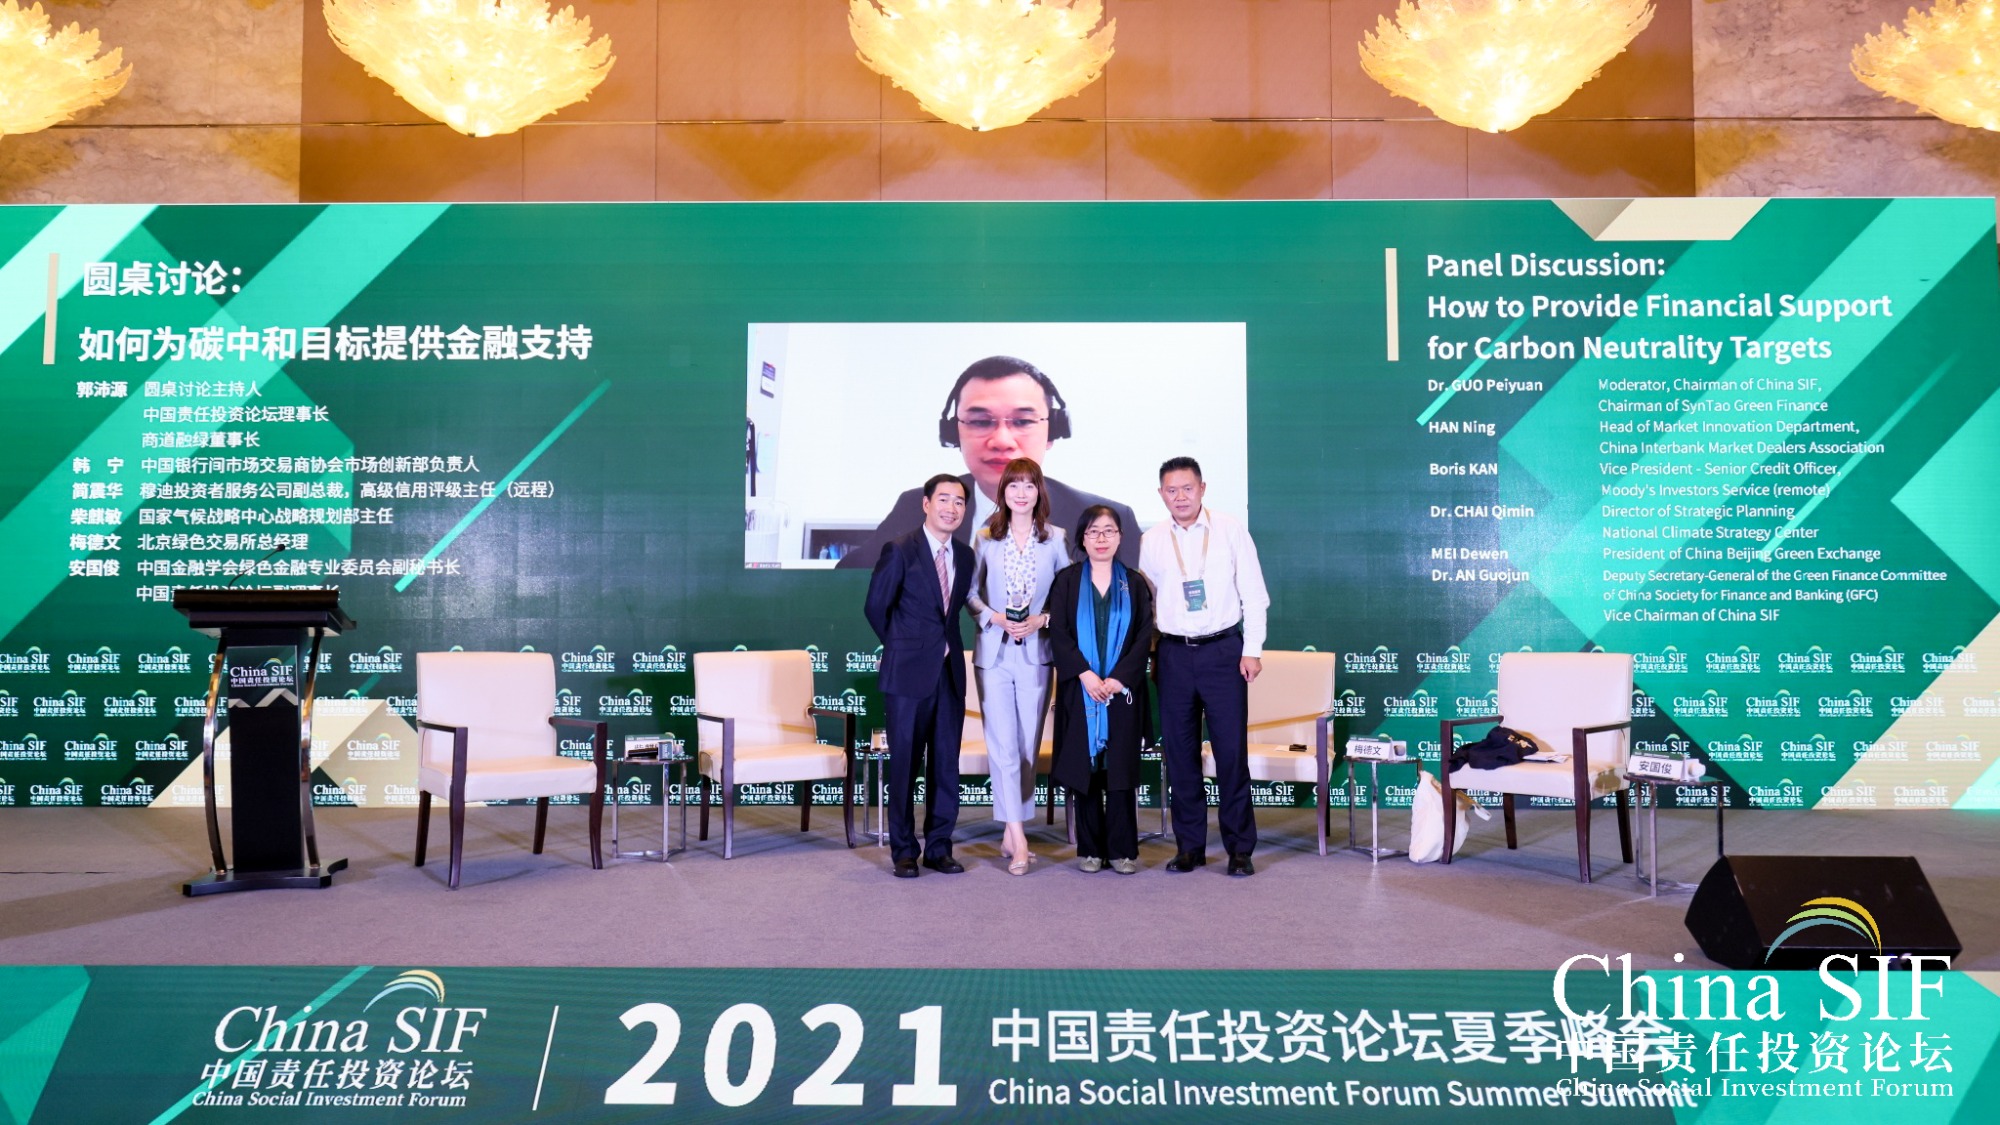 2021 Summer Summit｜ How to Provide Financial Support for Carbon Neutrality Targets